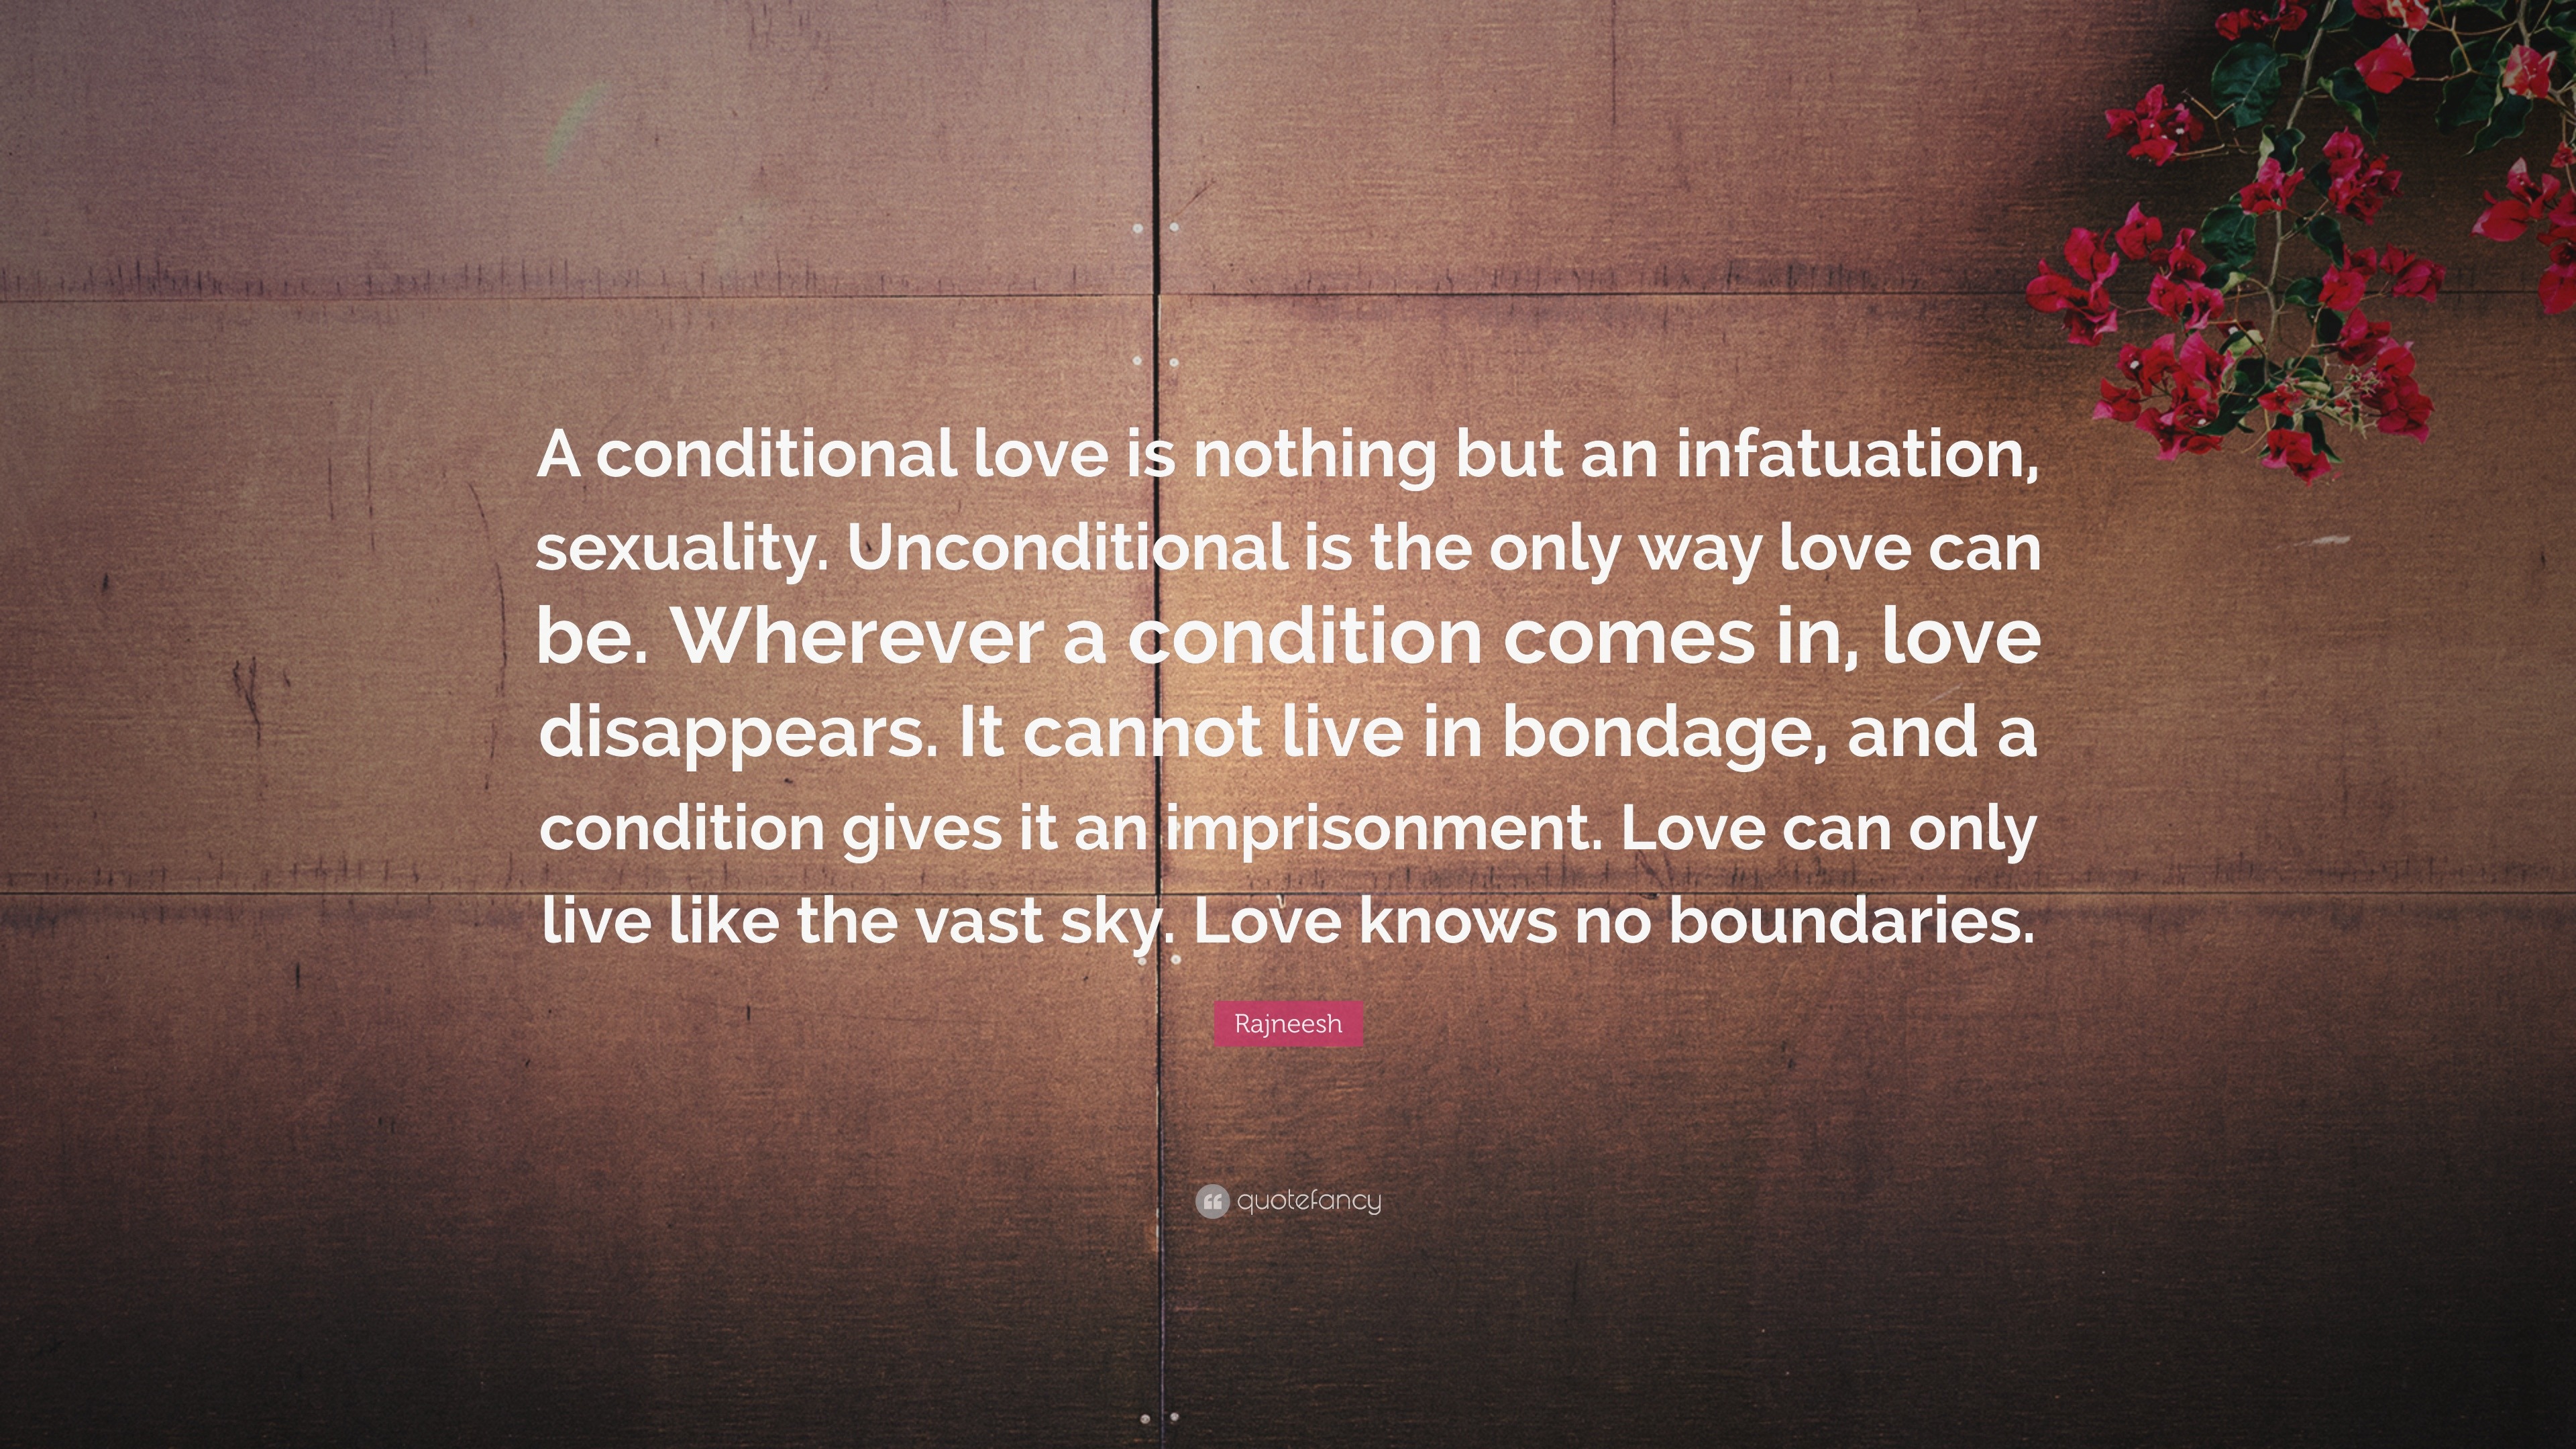 Rajneesh Quote “A conditional love is nothing but an infatuation uality Unconditional